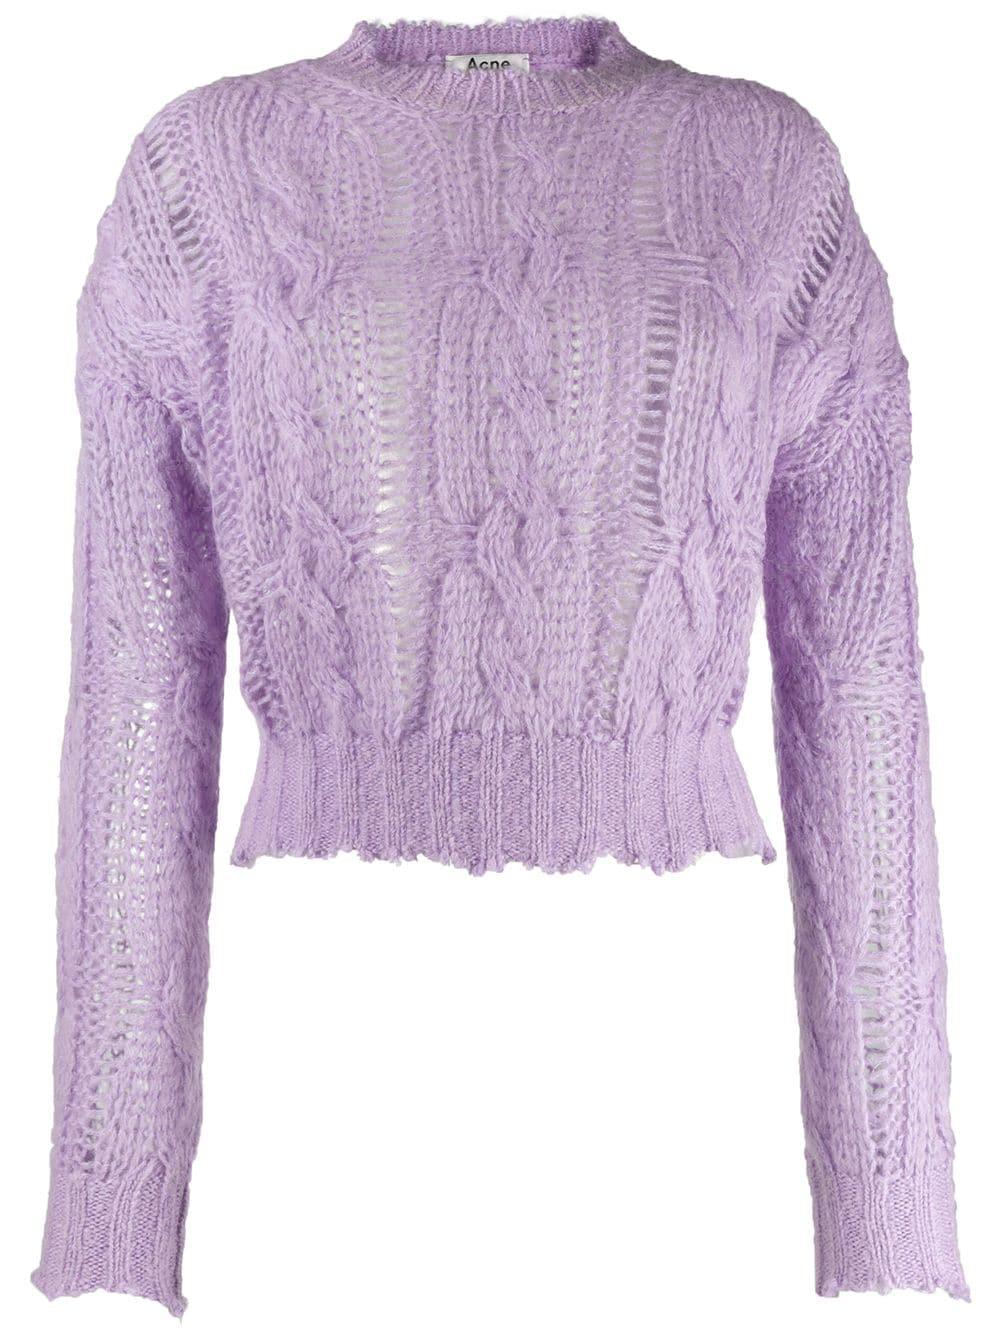 Acne Studios Frayed Cable Knit Sweater in Purple - Lyst